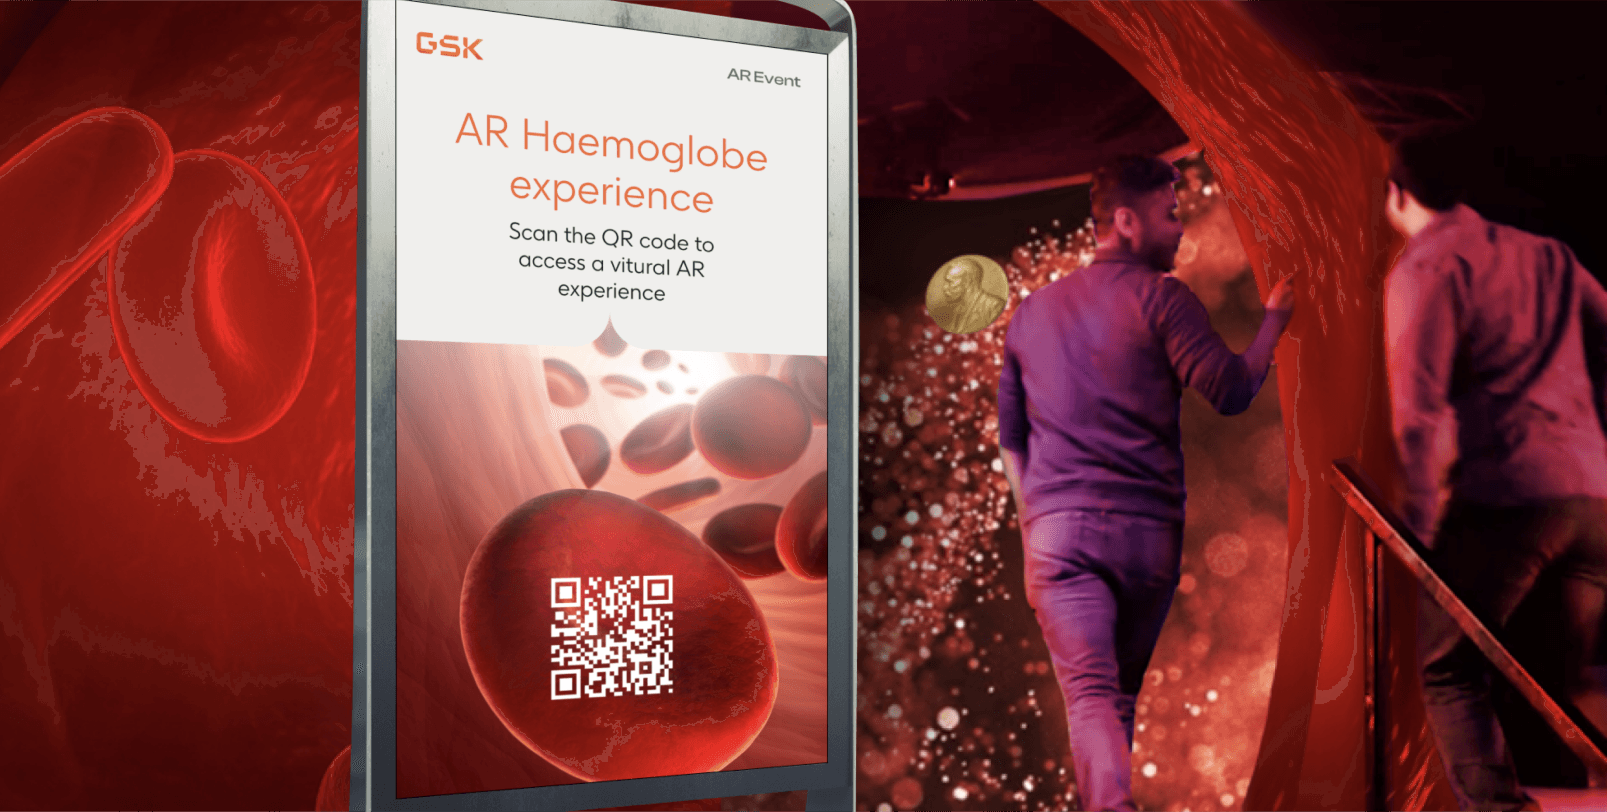 360 degree Augmented Reality experience for GSK